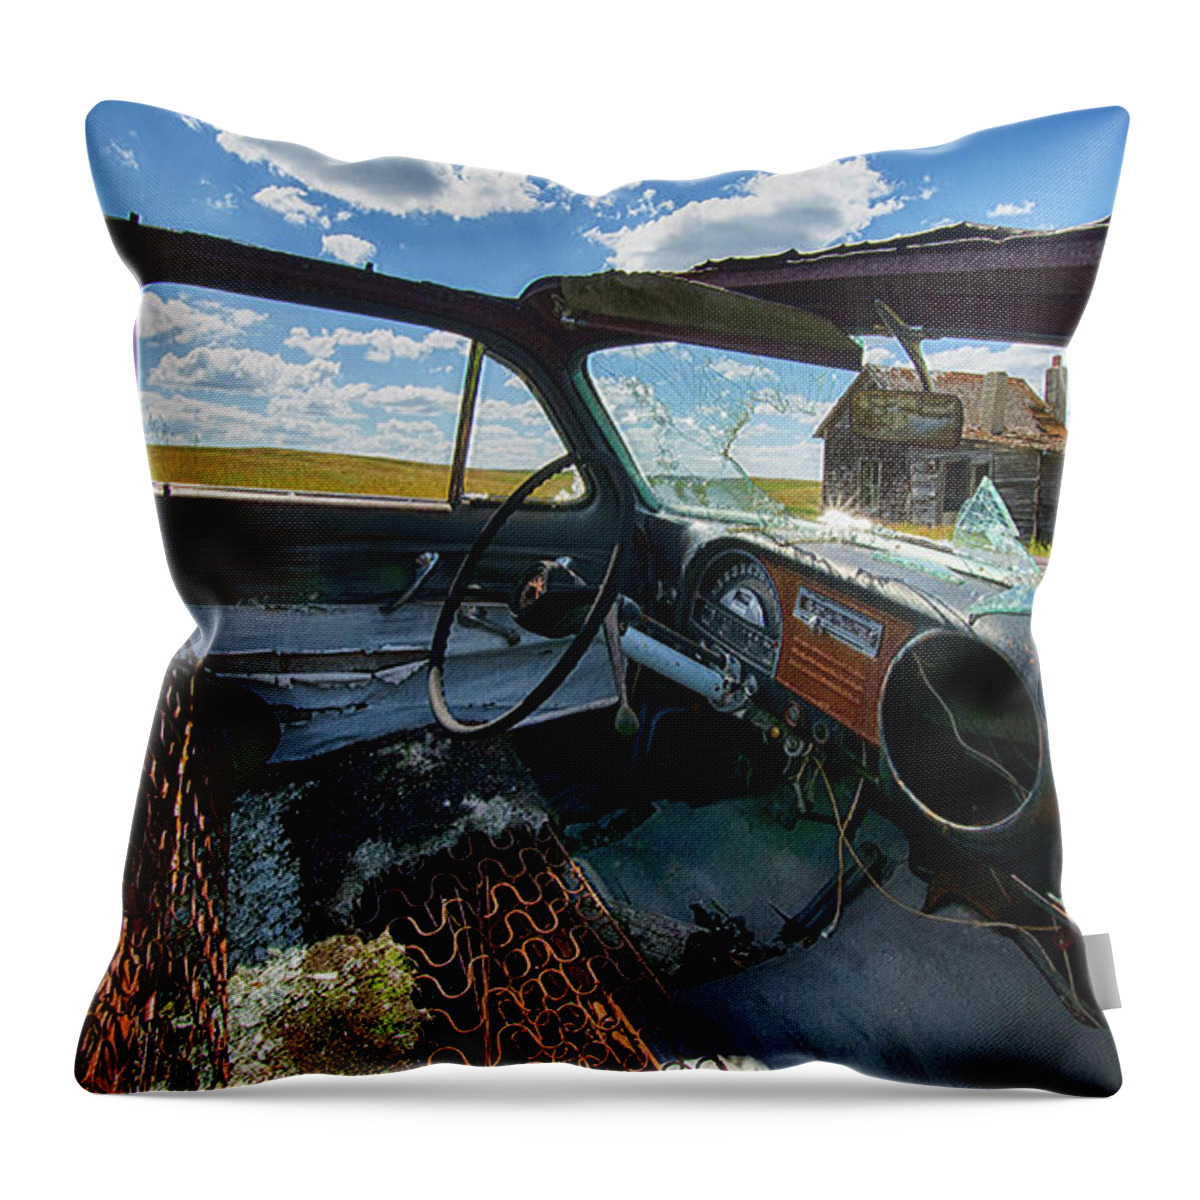 Home Home On The Range Throw Pillow featuring the photograph Home Home On The Range 2 by Bob Christopher